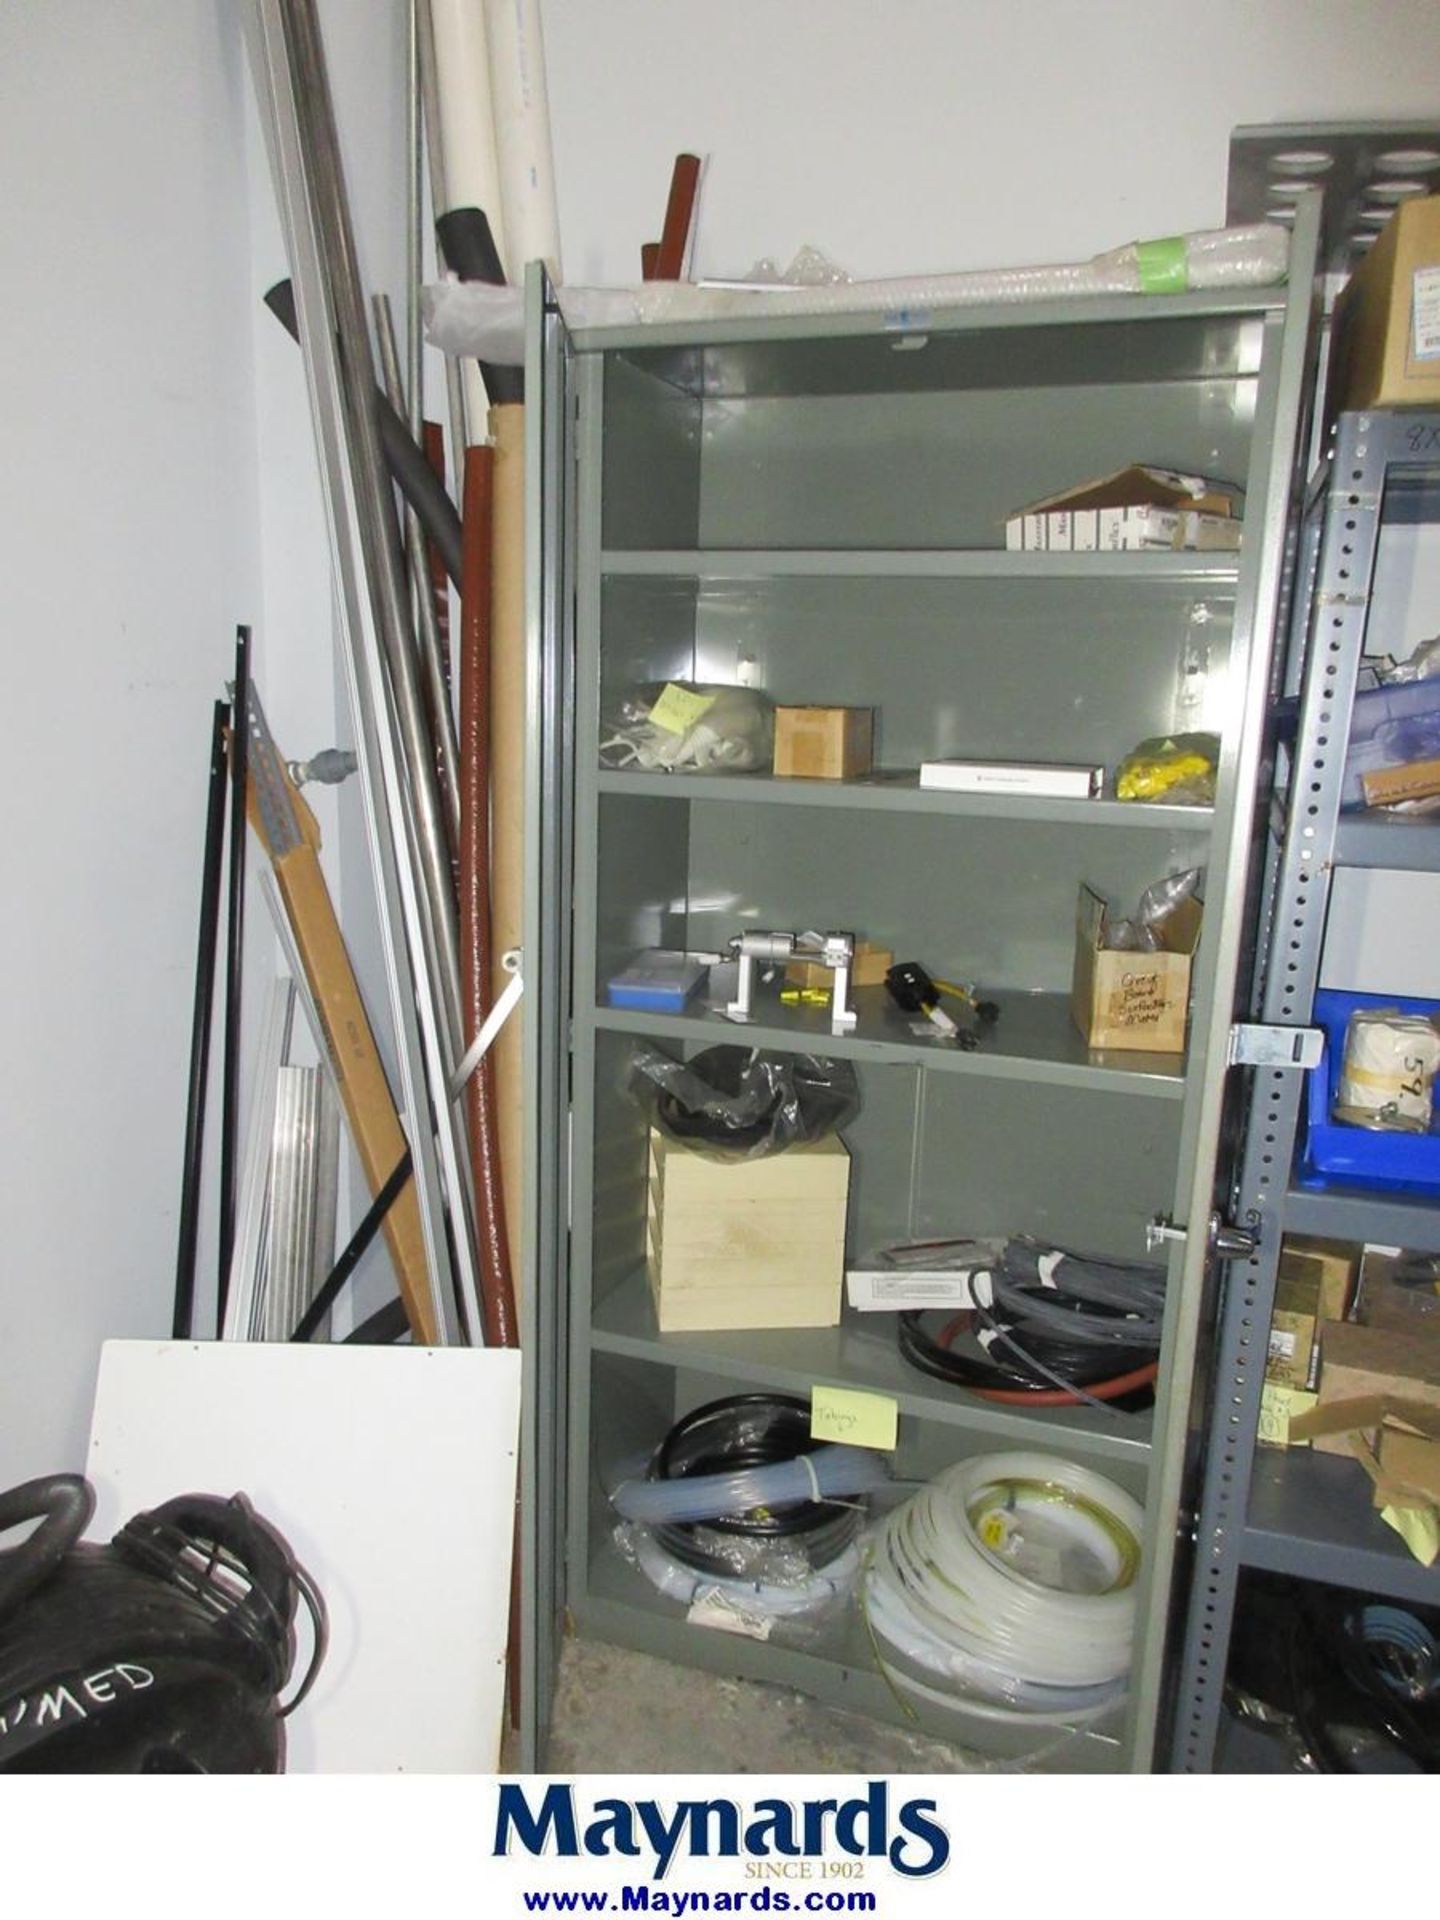 Contents of Web Storage Room - Image 12 of 24